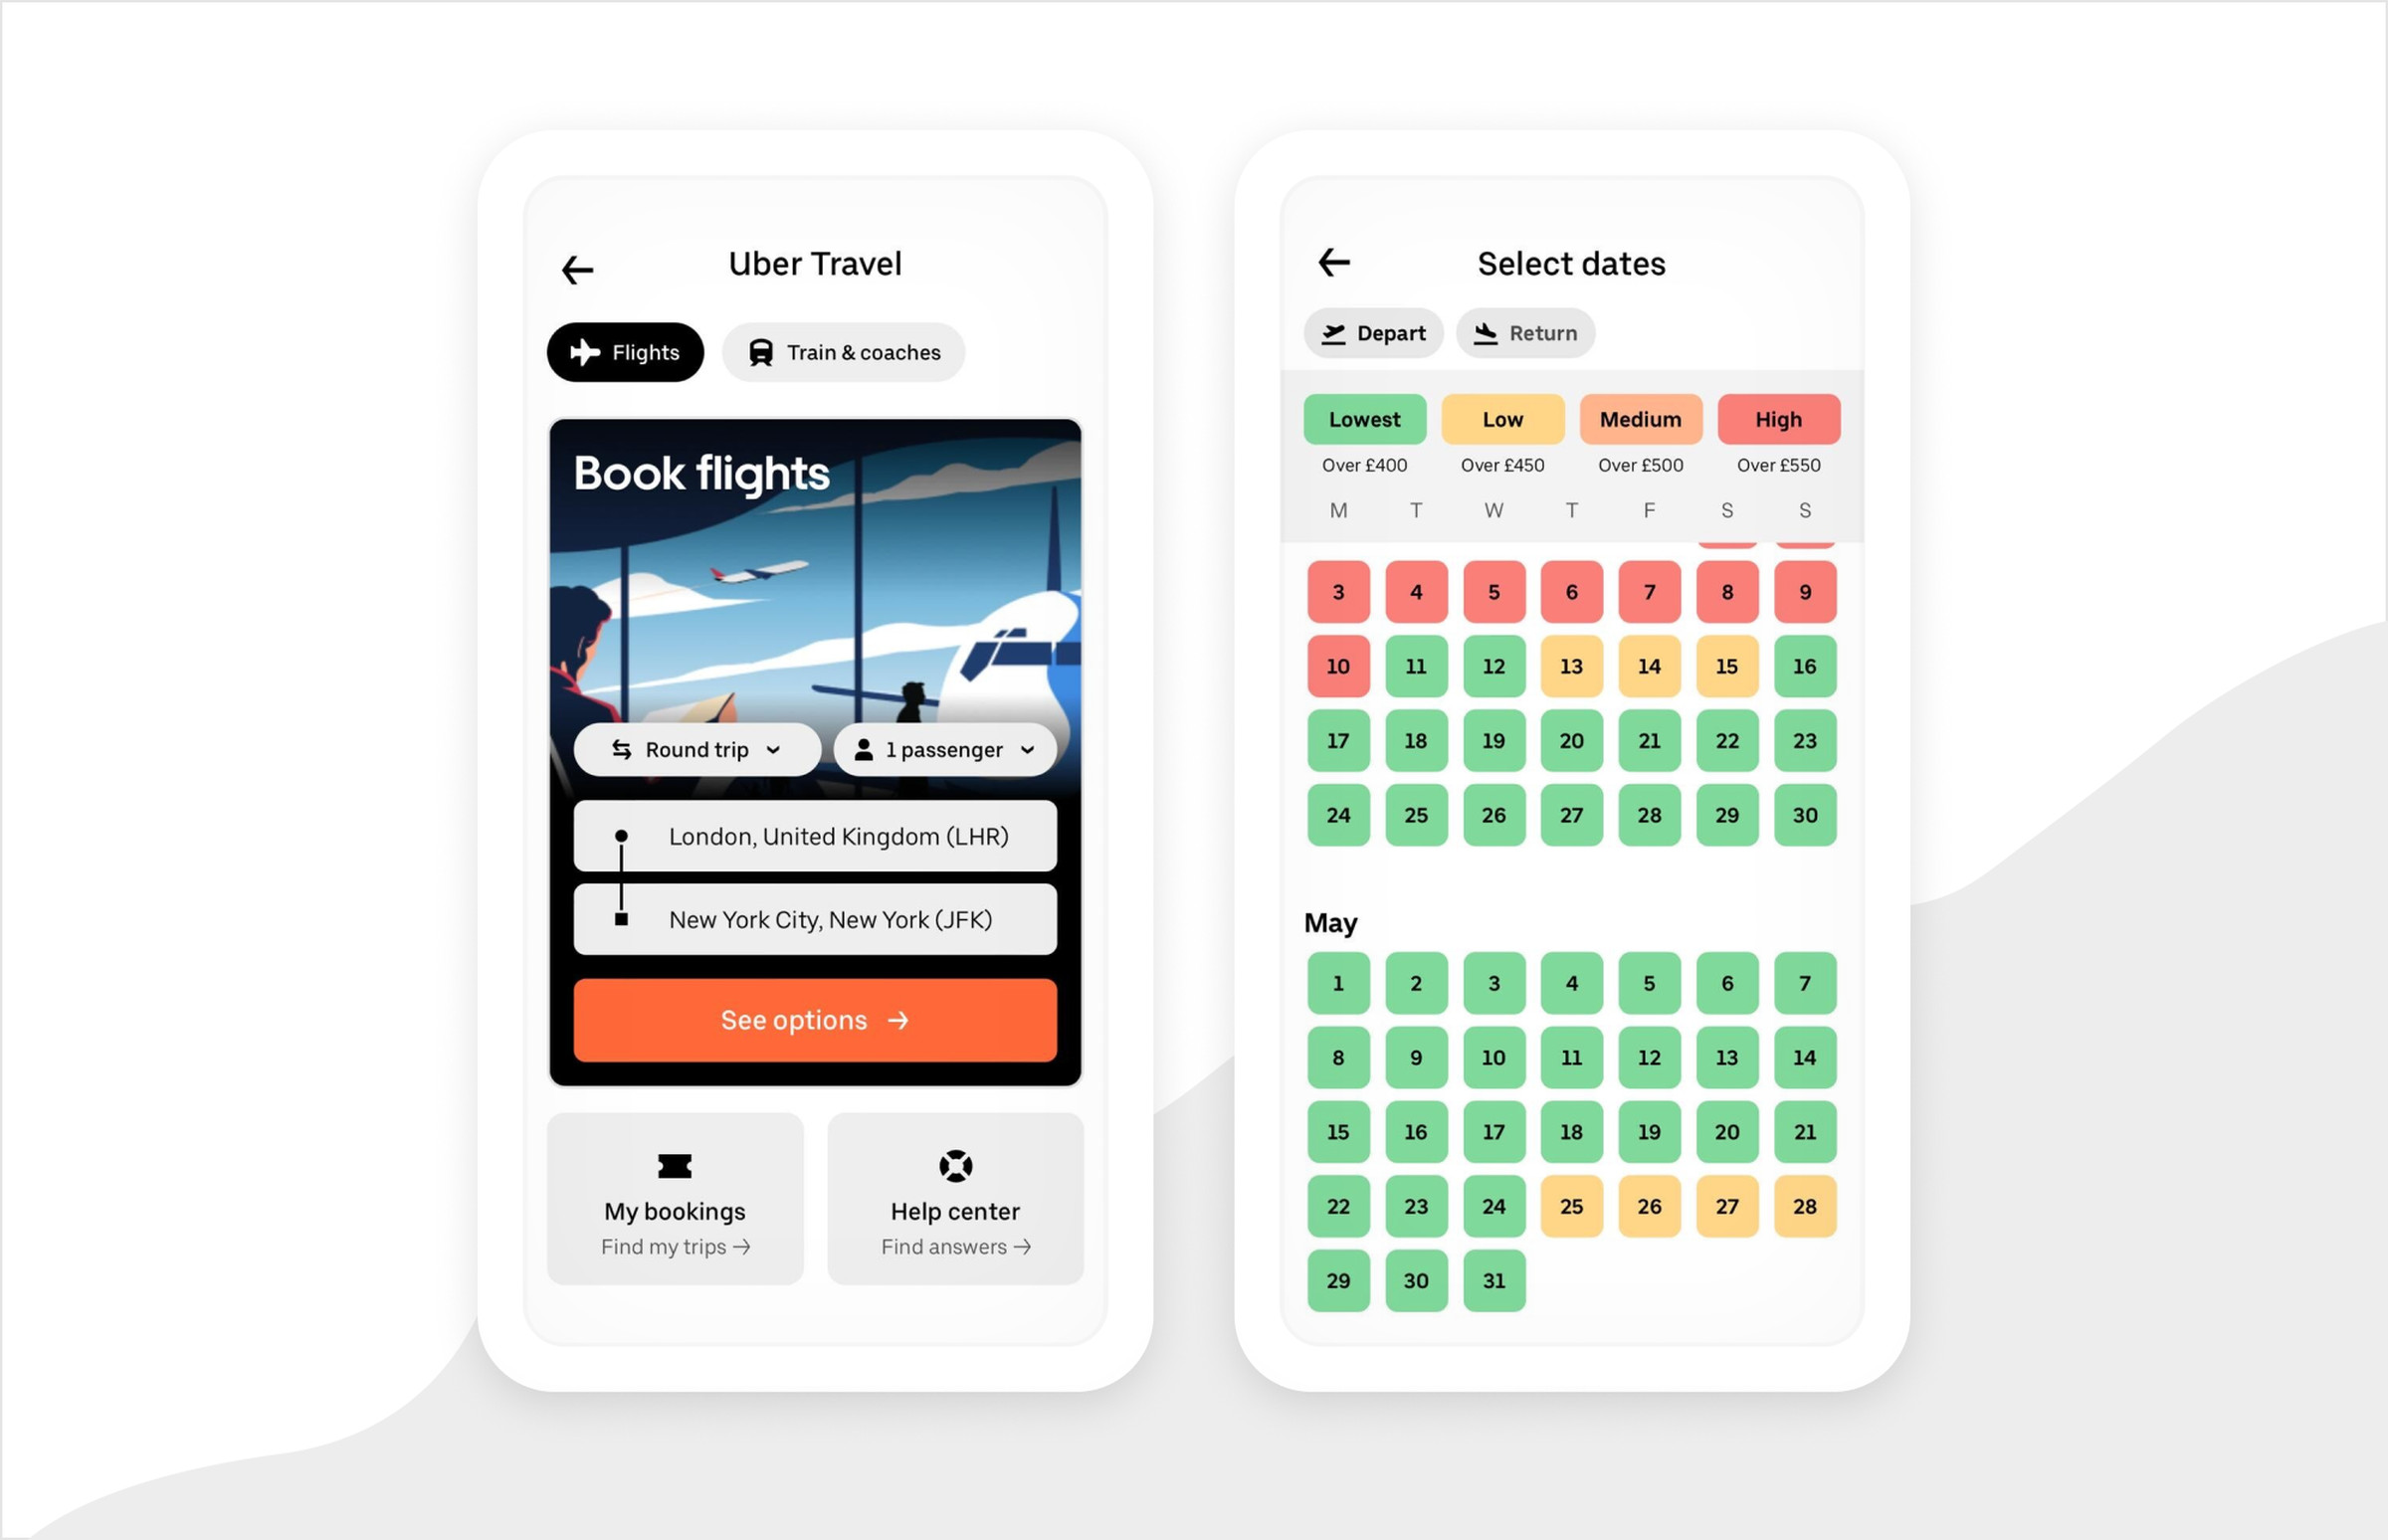 An illustrated image revealing how the flight booking experience will look like in the Uber app.